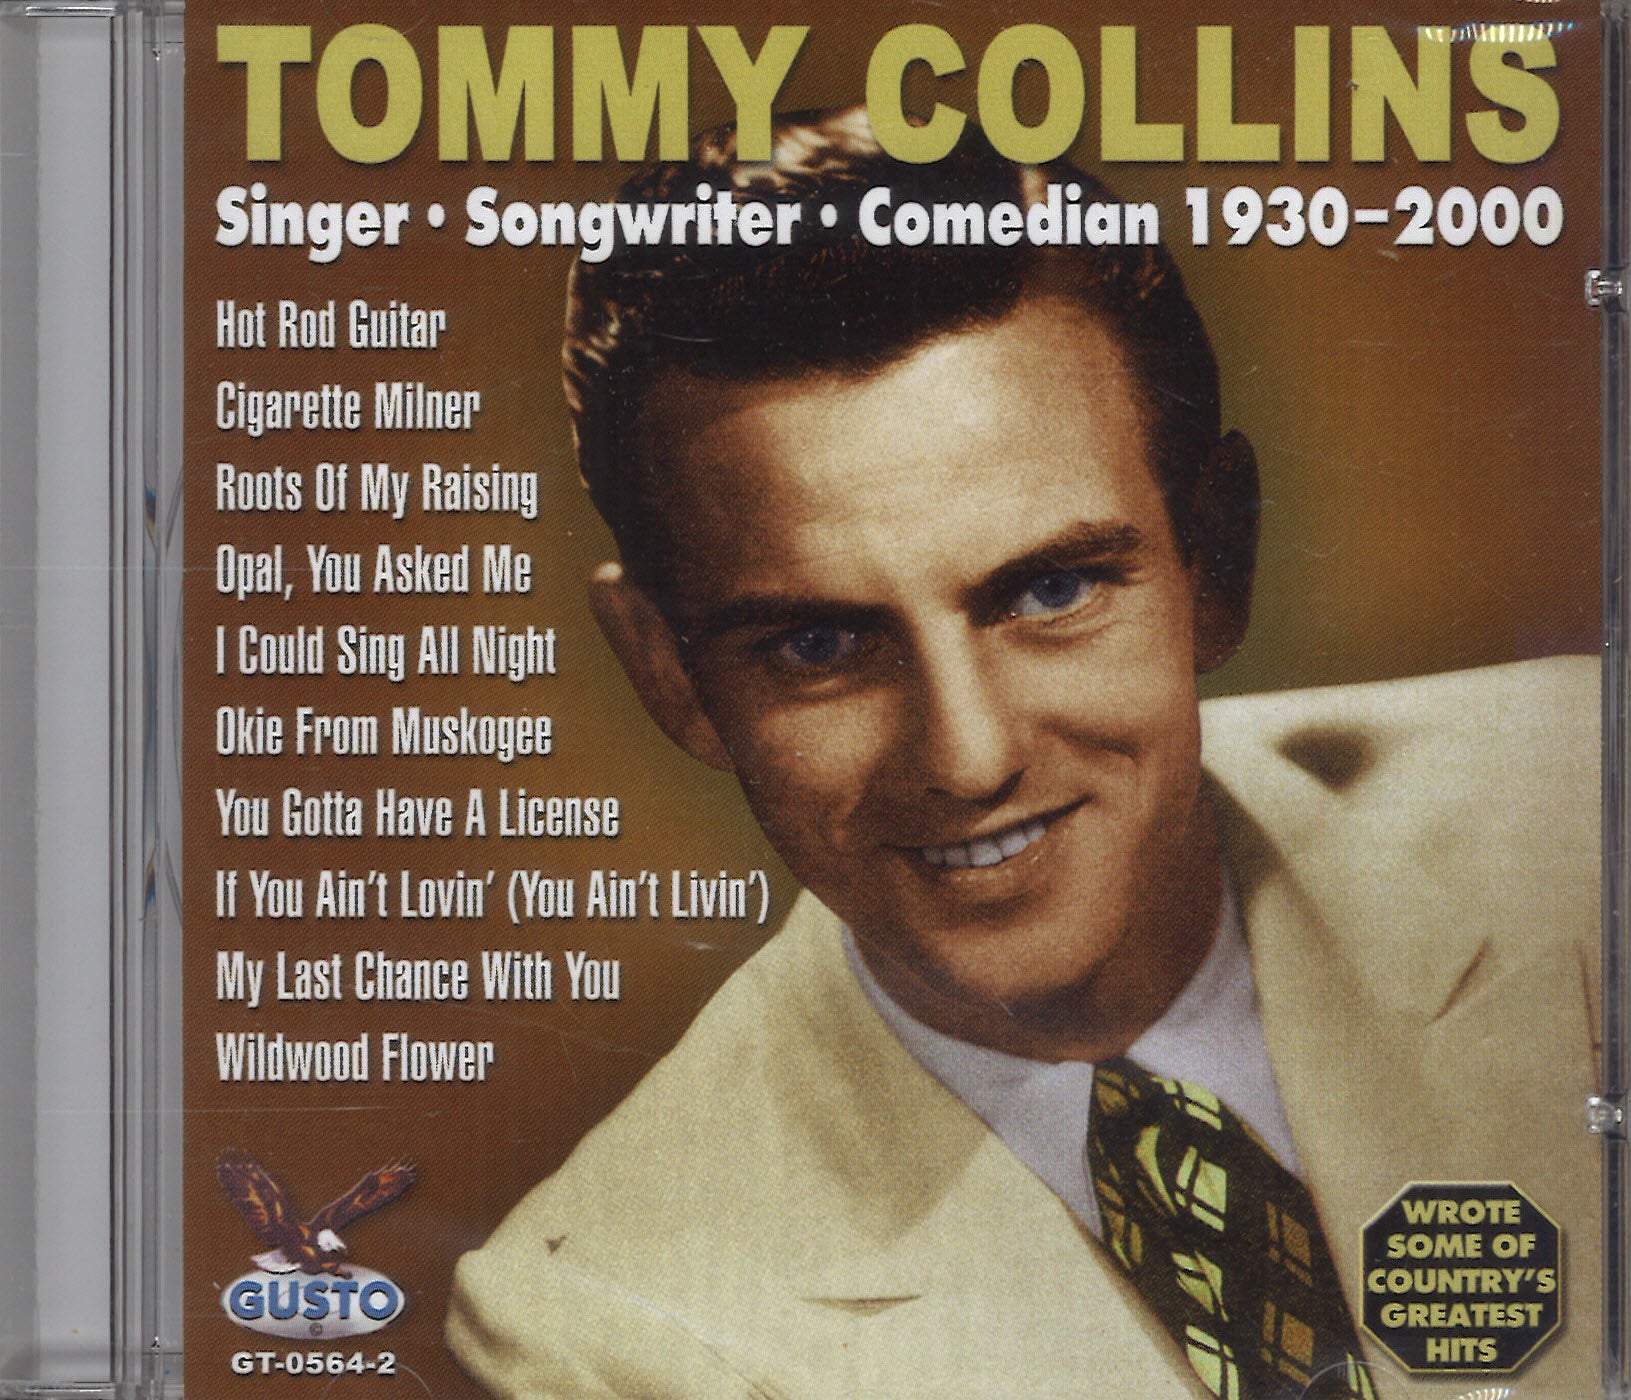 Tommy Collins Singer-Songwriter-Comedian